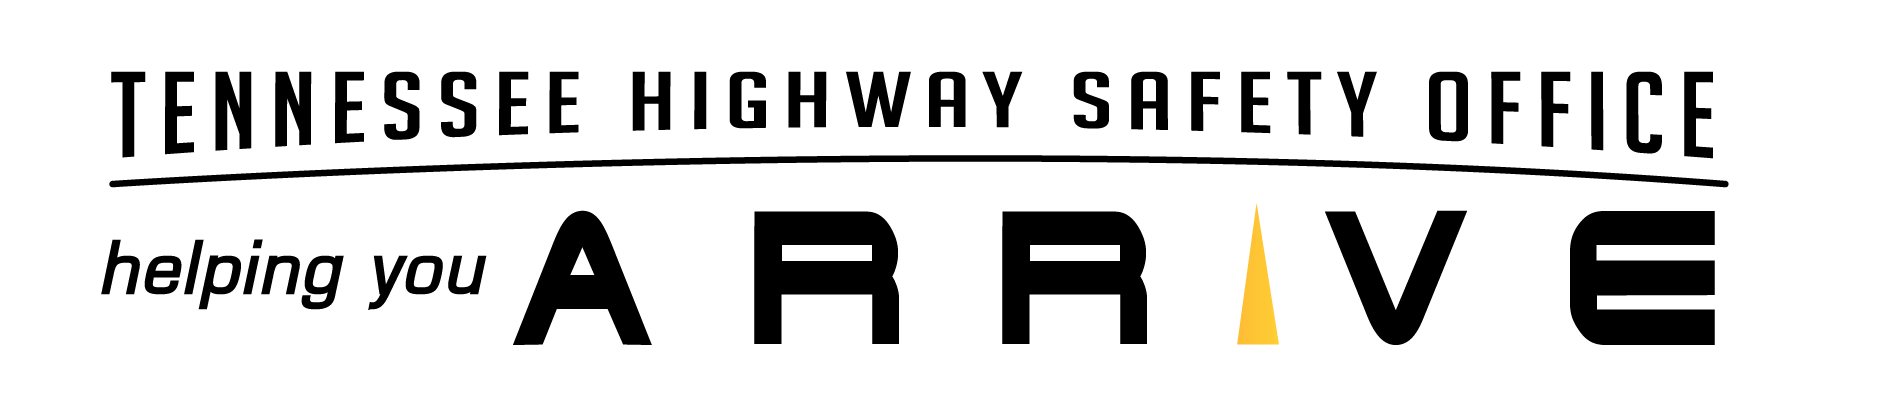 Tennessee Highway Safety Office Helping you Arrive logo